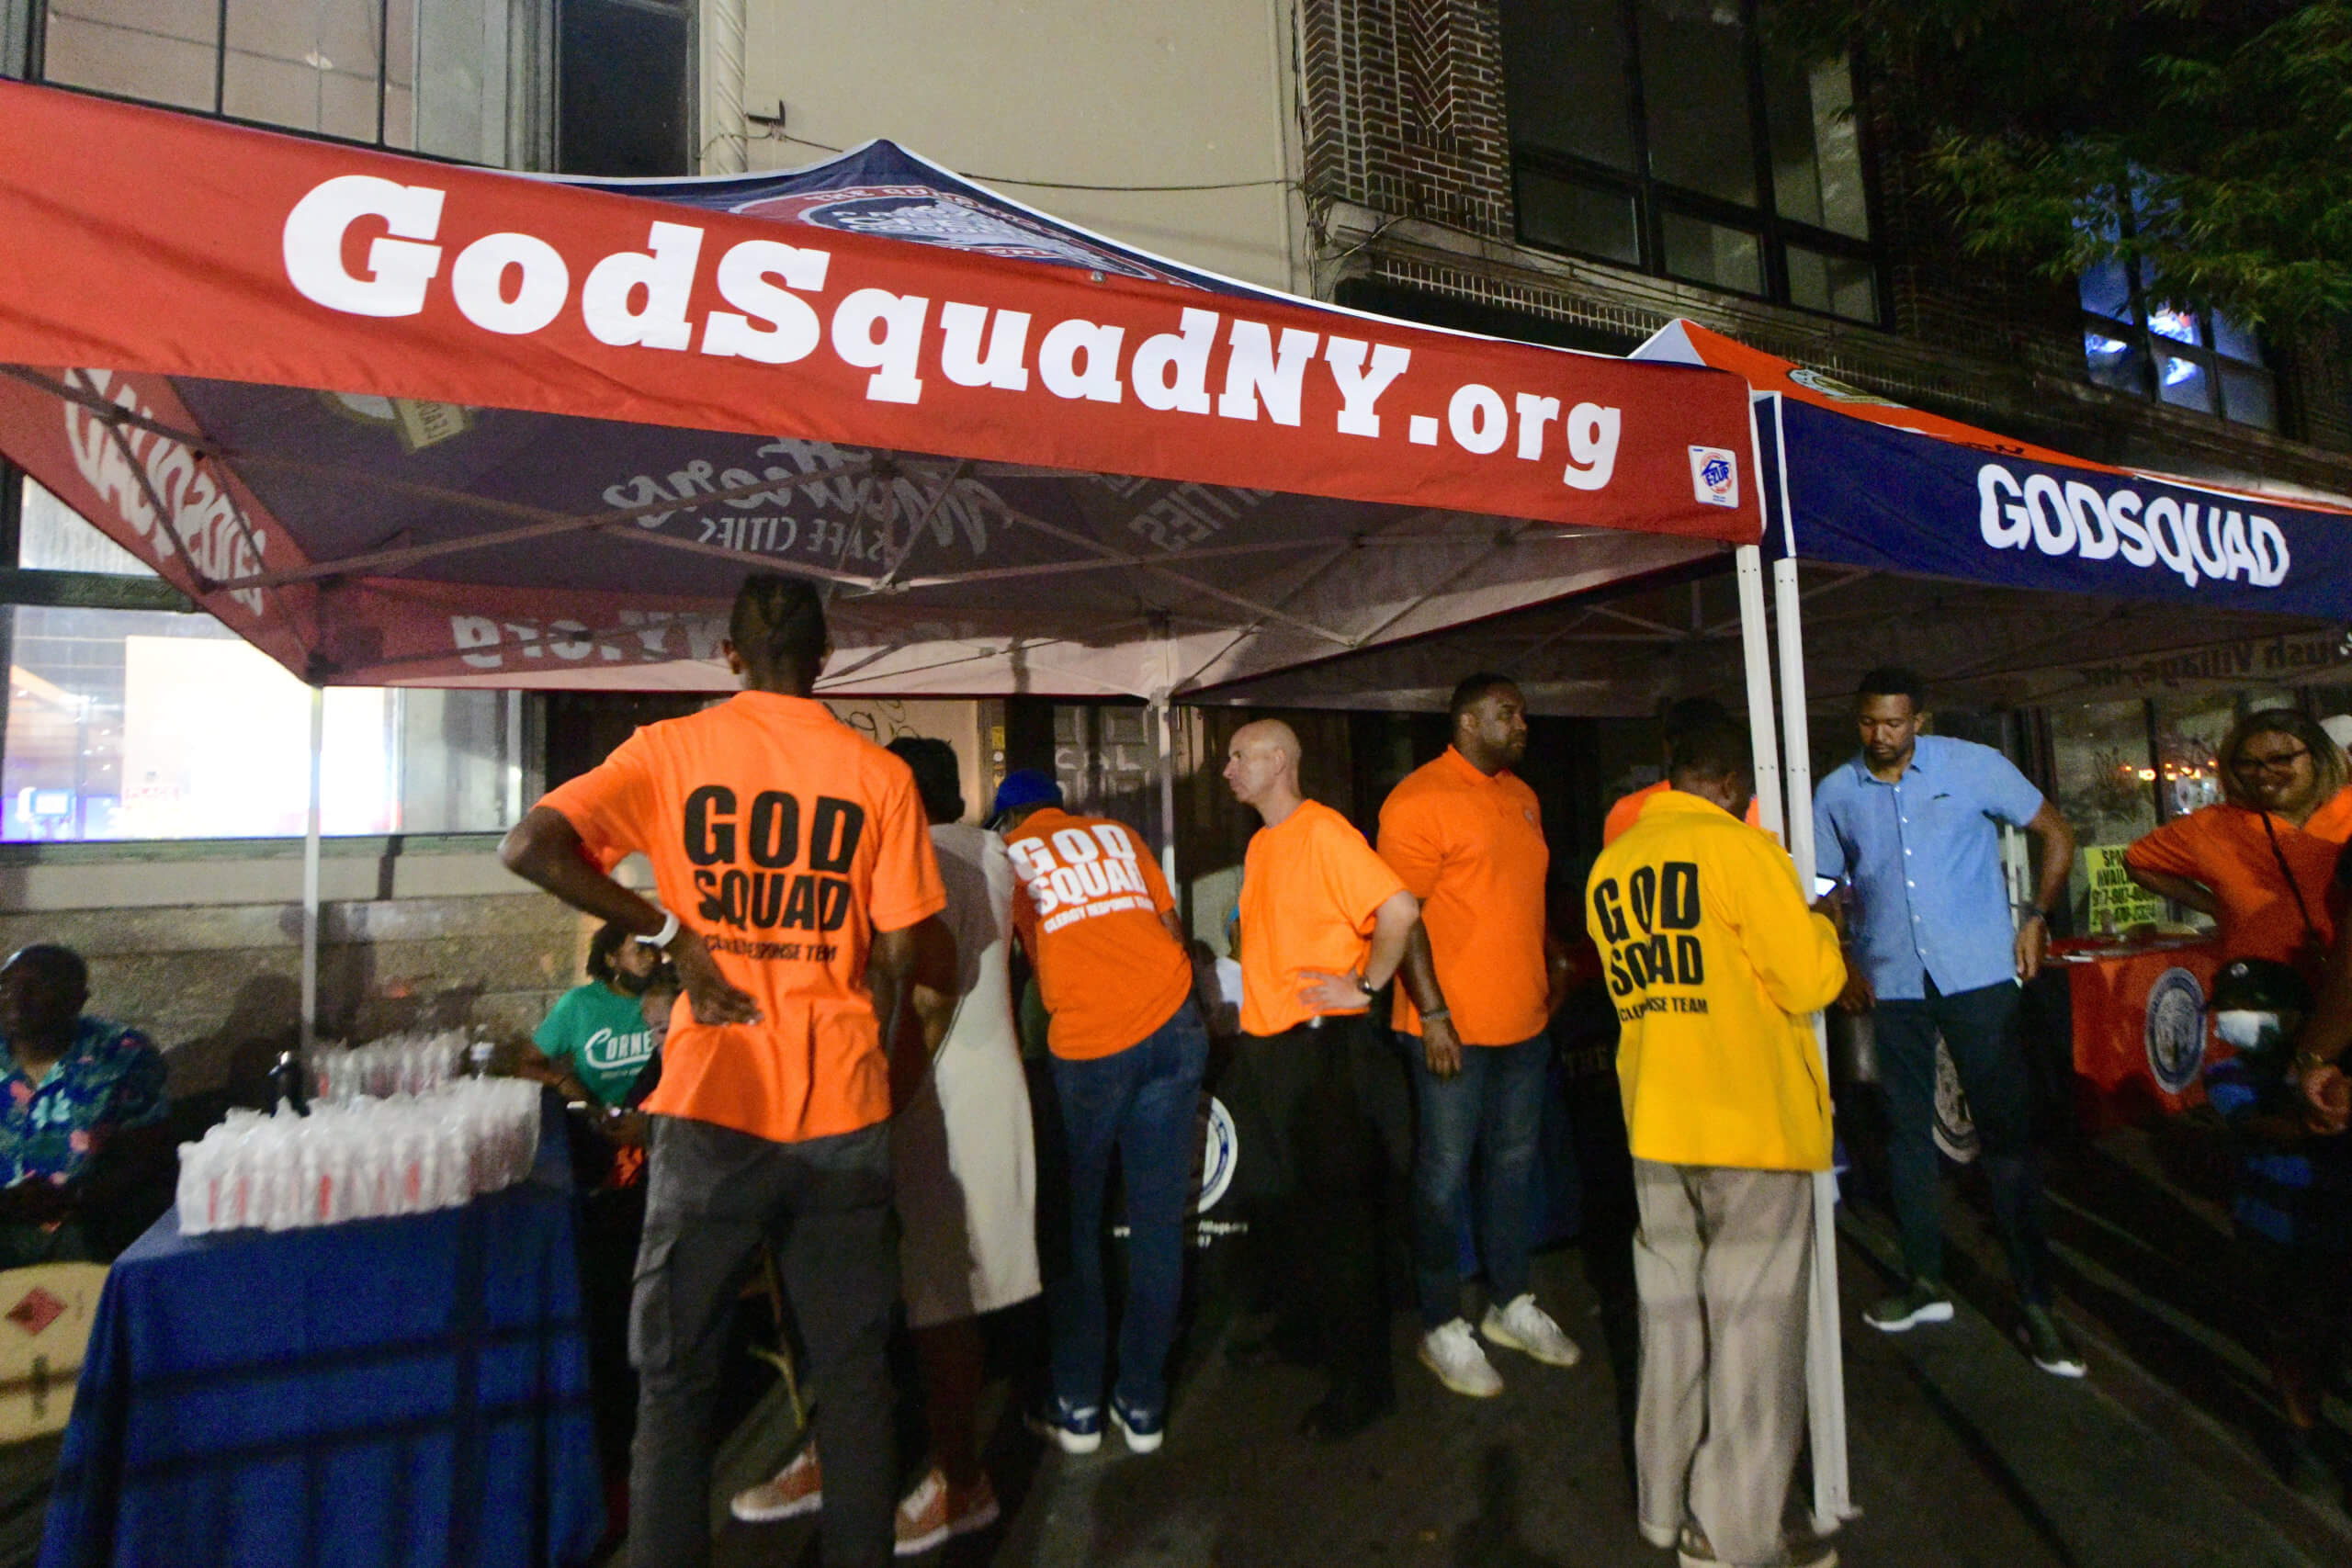 God Squad violence interrupters in Brooklyn